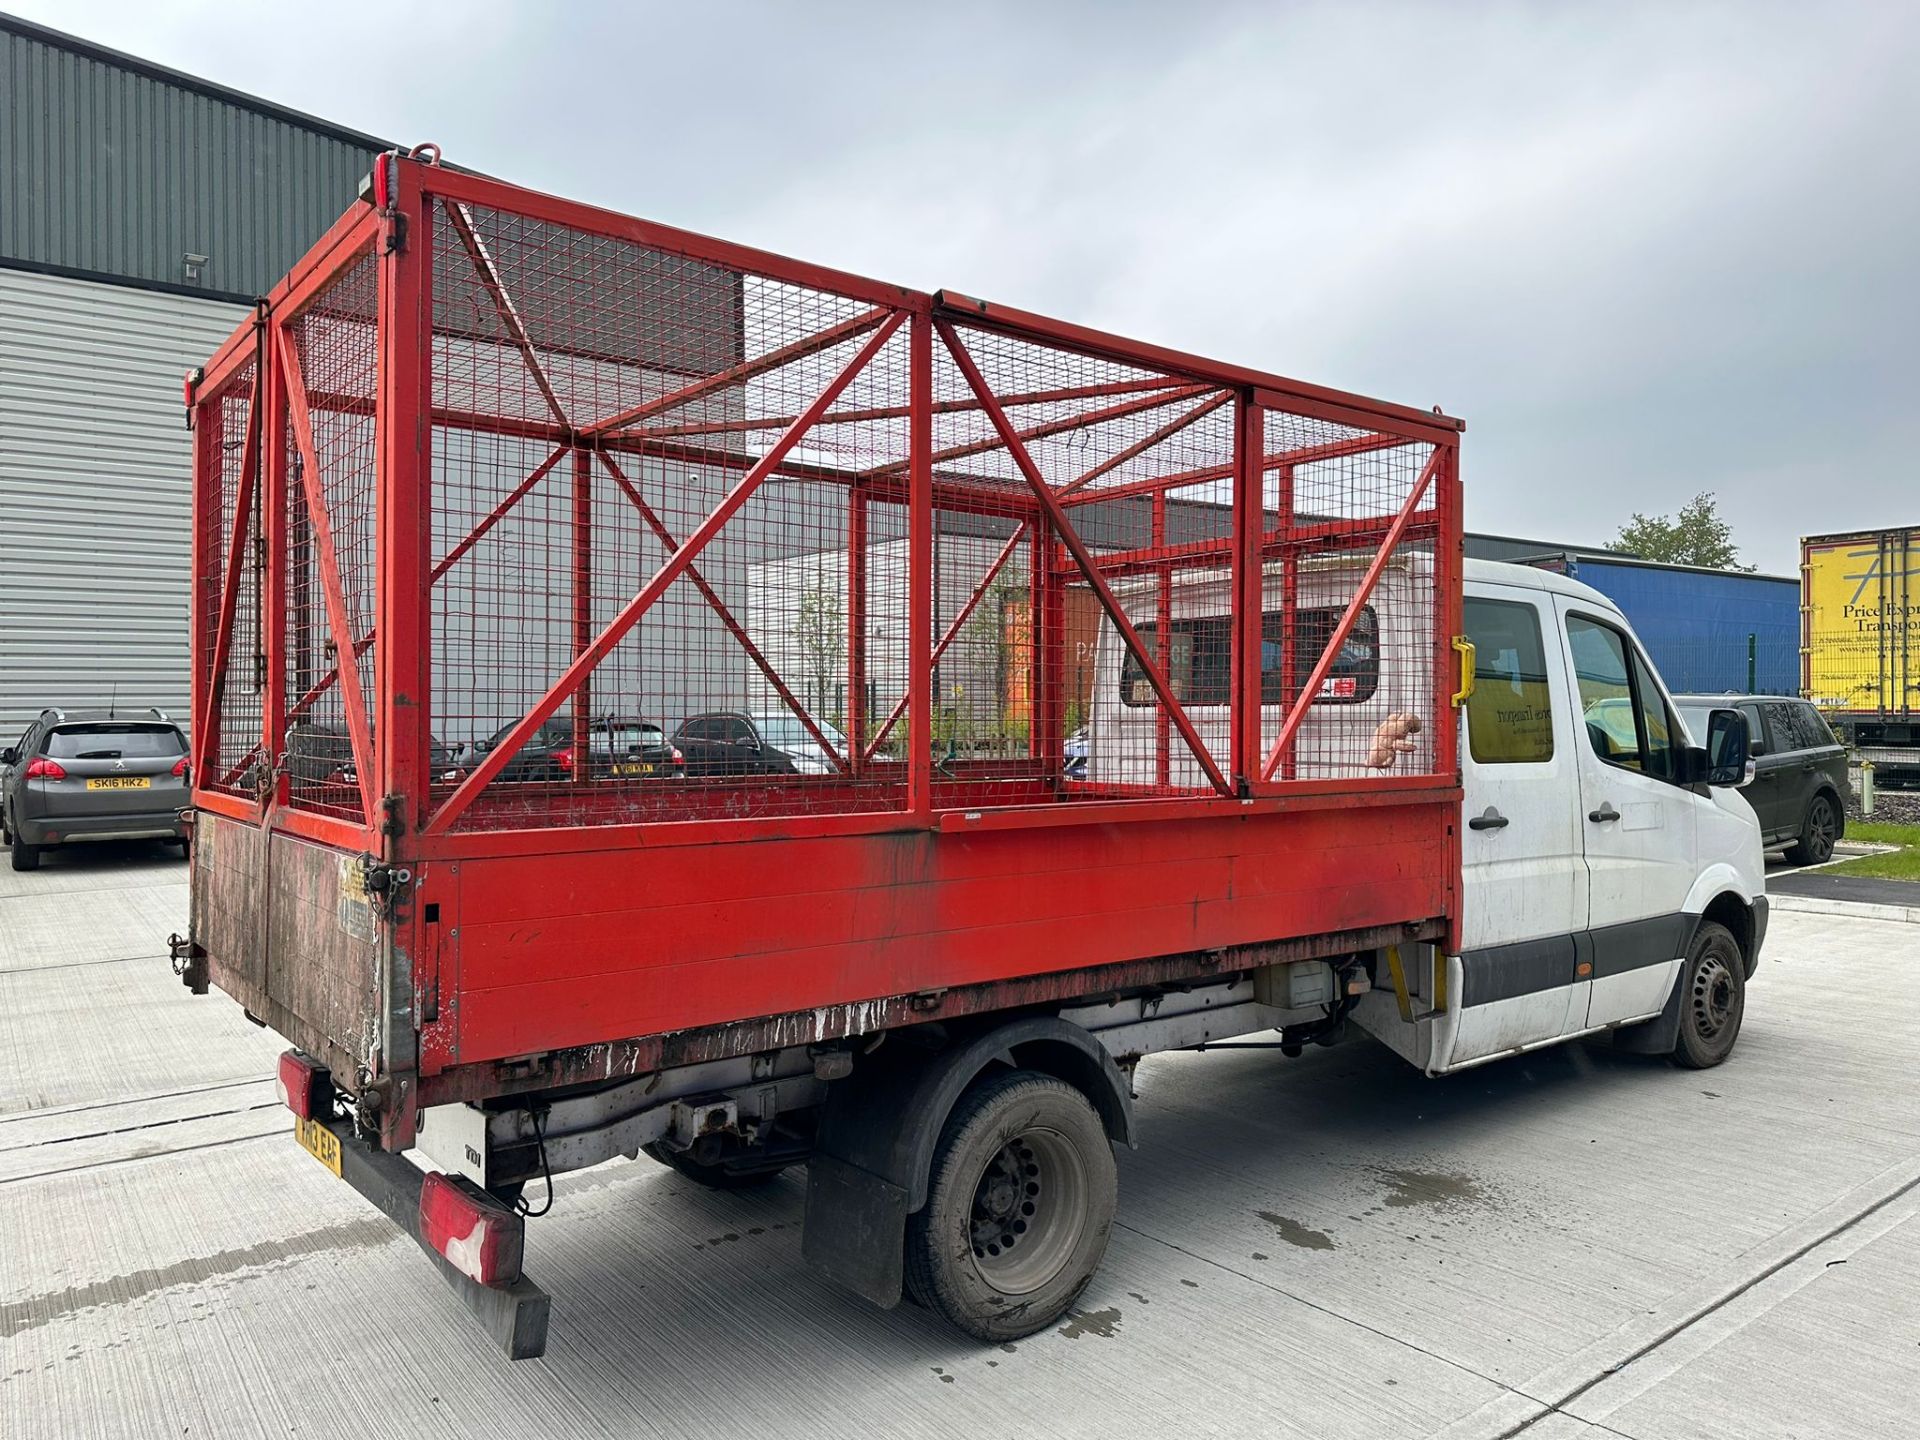 2013 Volkswagen Crafter (Ex Council Fleet Vehicle) Caged Tipper - Image 12 of 40